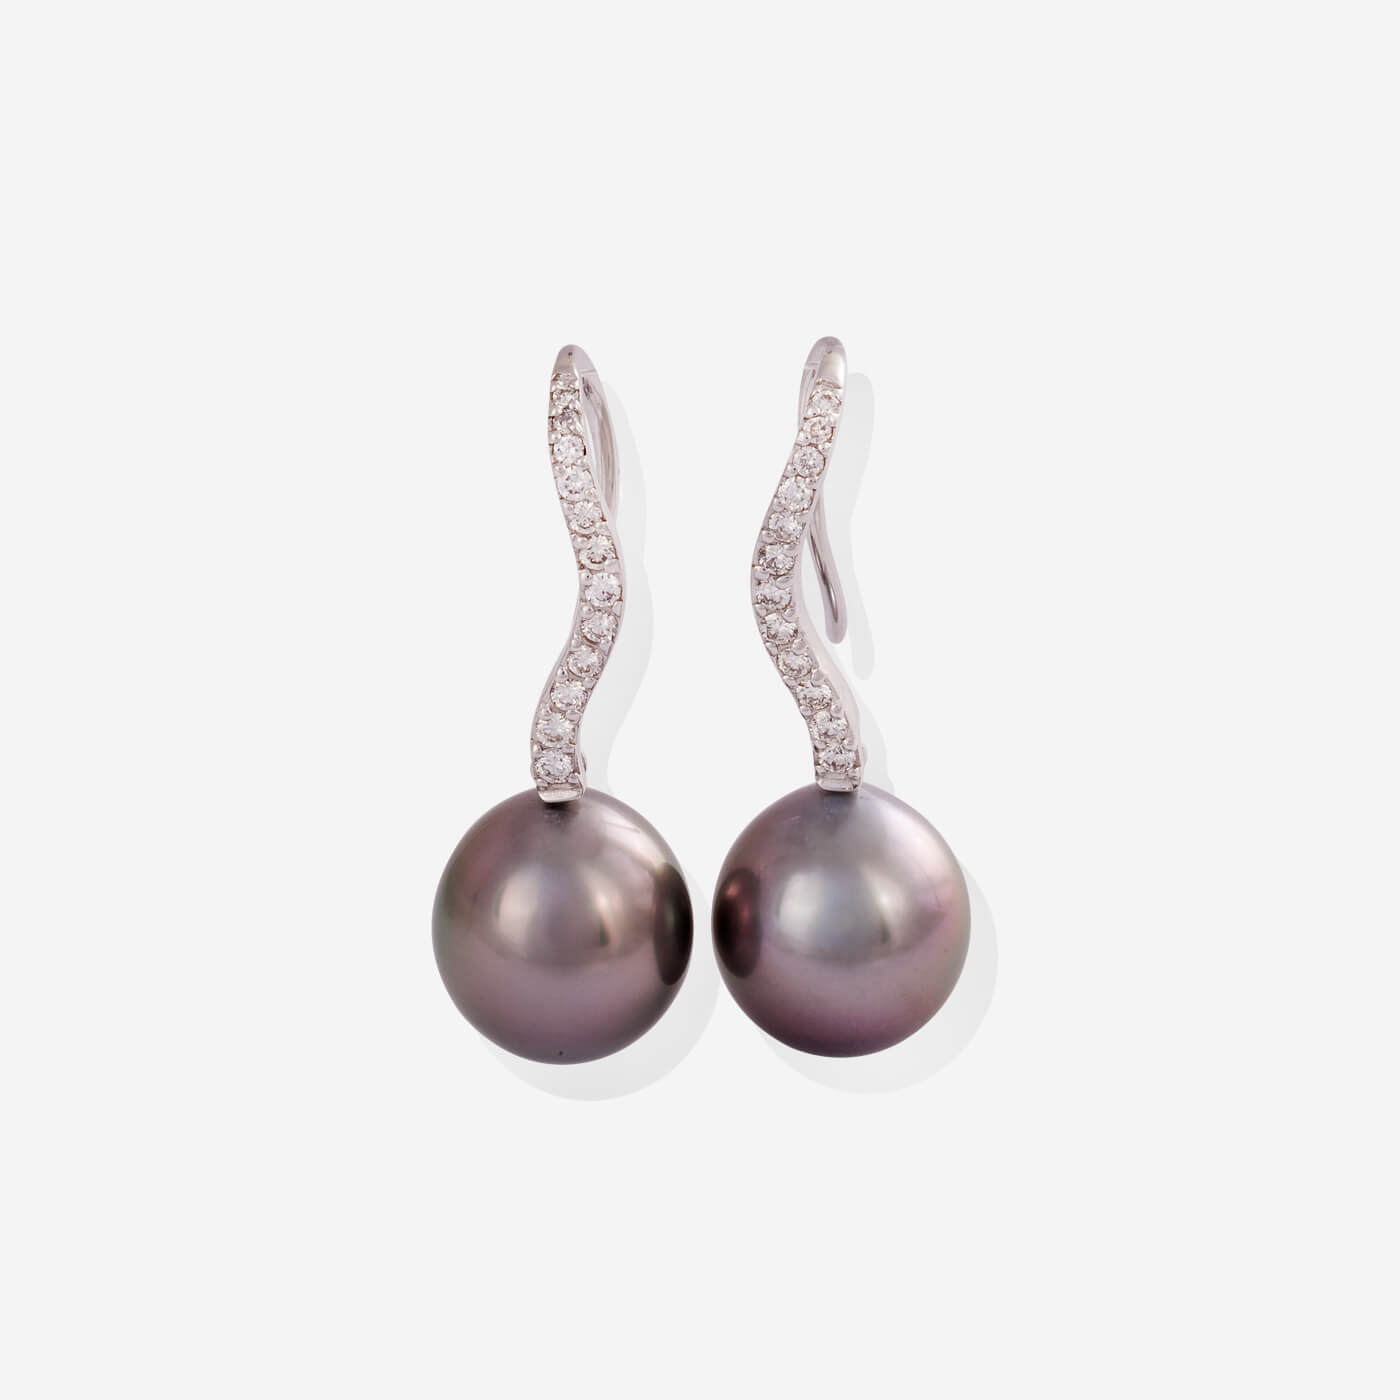 White Gold Grey Pearl With Diamonds Earrings - Ref: 16439